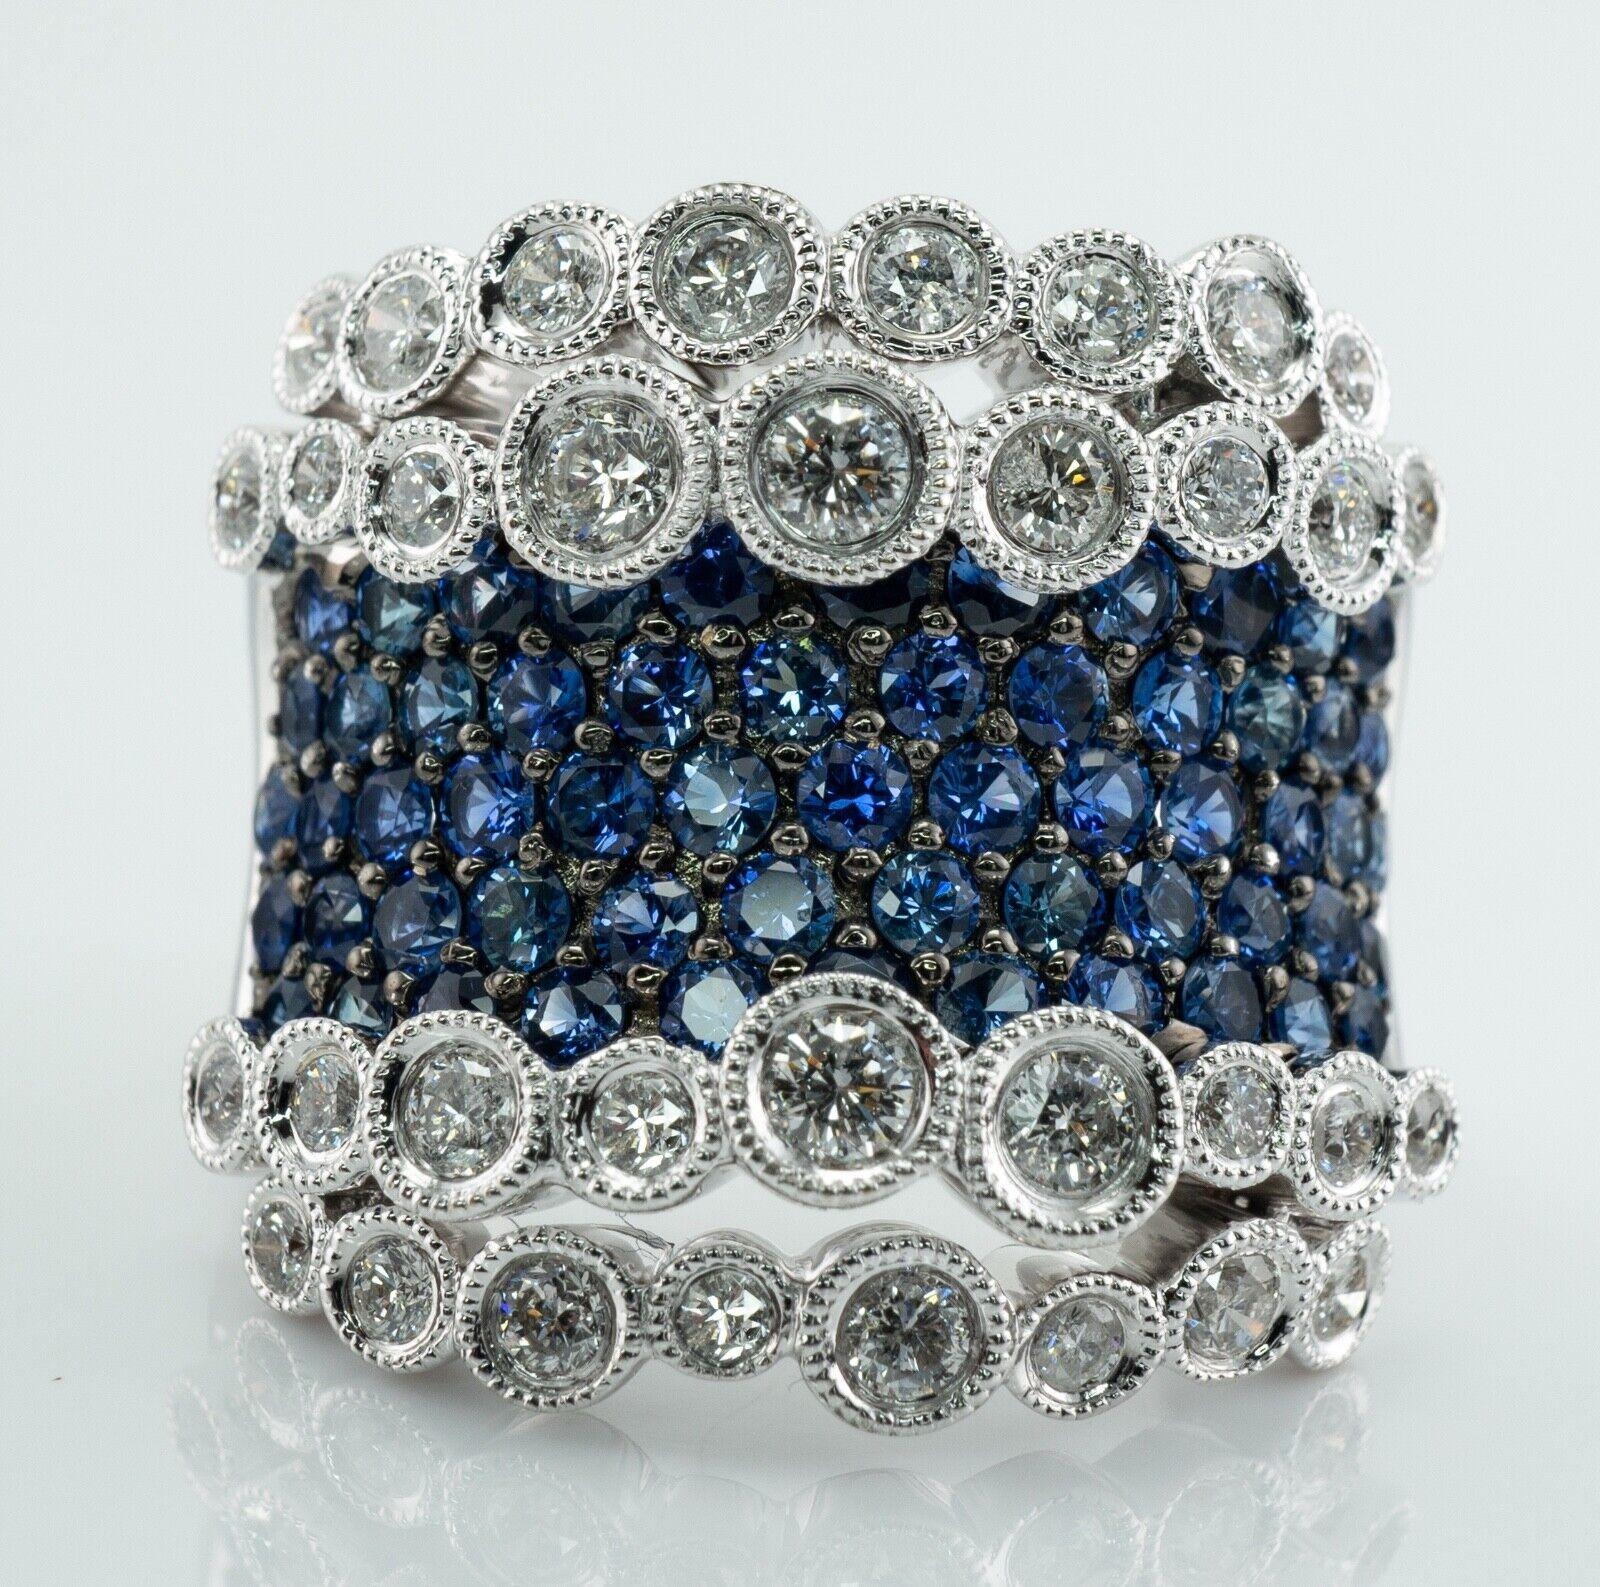 This amazing showstopper ring is crafted in solid 18K White Gold.
There are genuine Earth mined 59 round cut sapphires, 2mm each = 2.95 carats total weight.
34 round brilliant cut diamonds graduate from .03 to .08 carats = 1.02 cts TDW of SI2-SI2